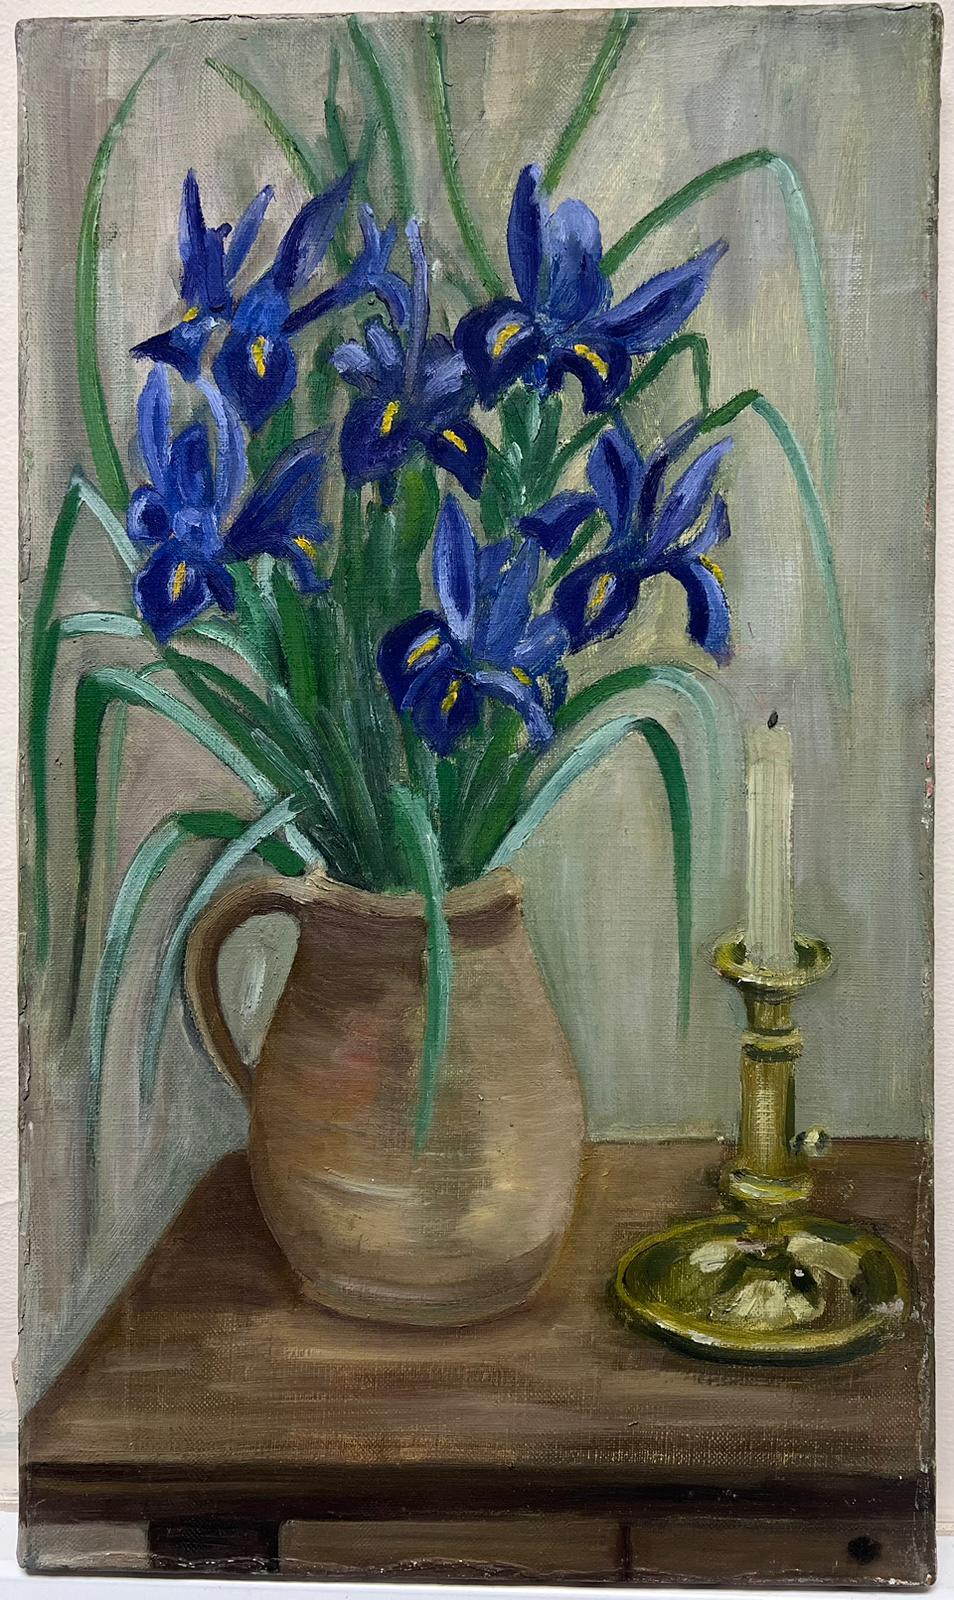 Mid 20th Century French Oil Painting Iris Flowers in Vase Still Life Interior For Sale 2